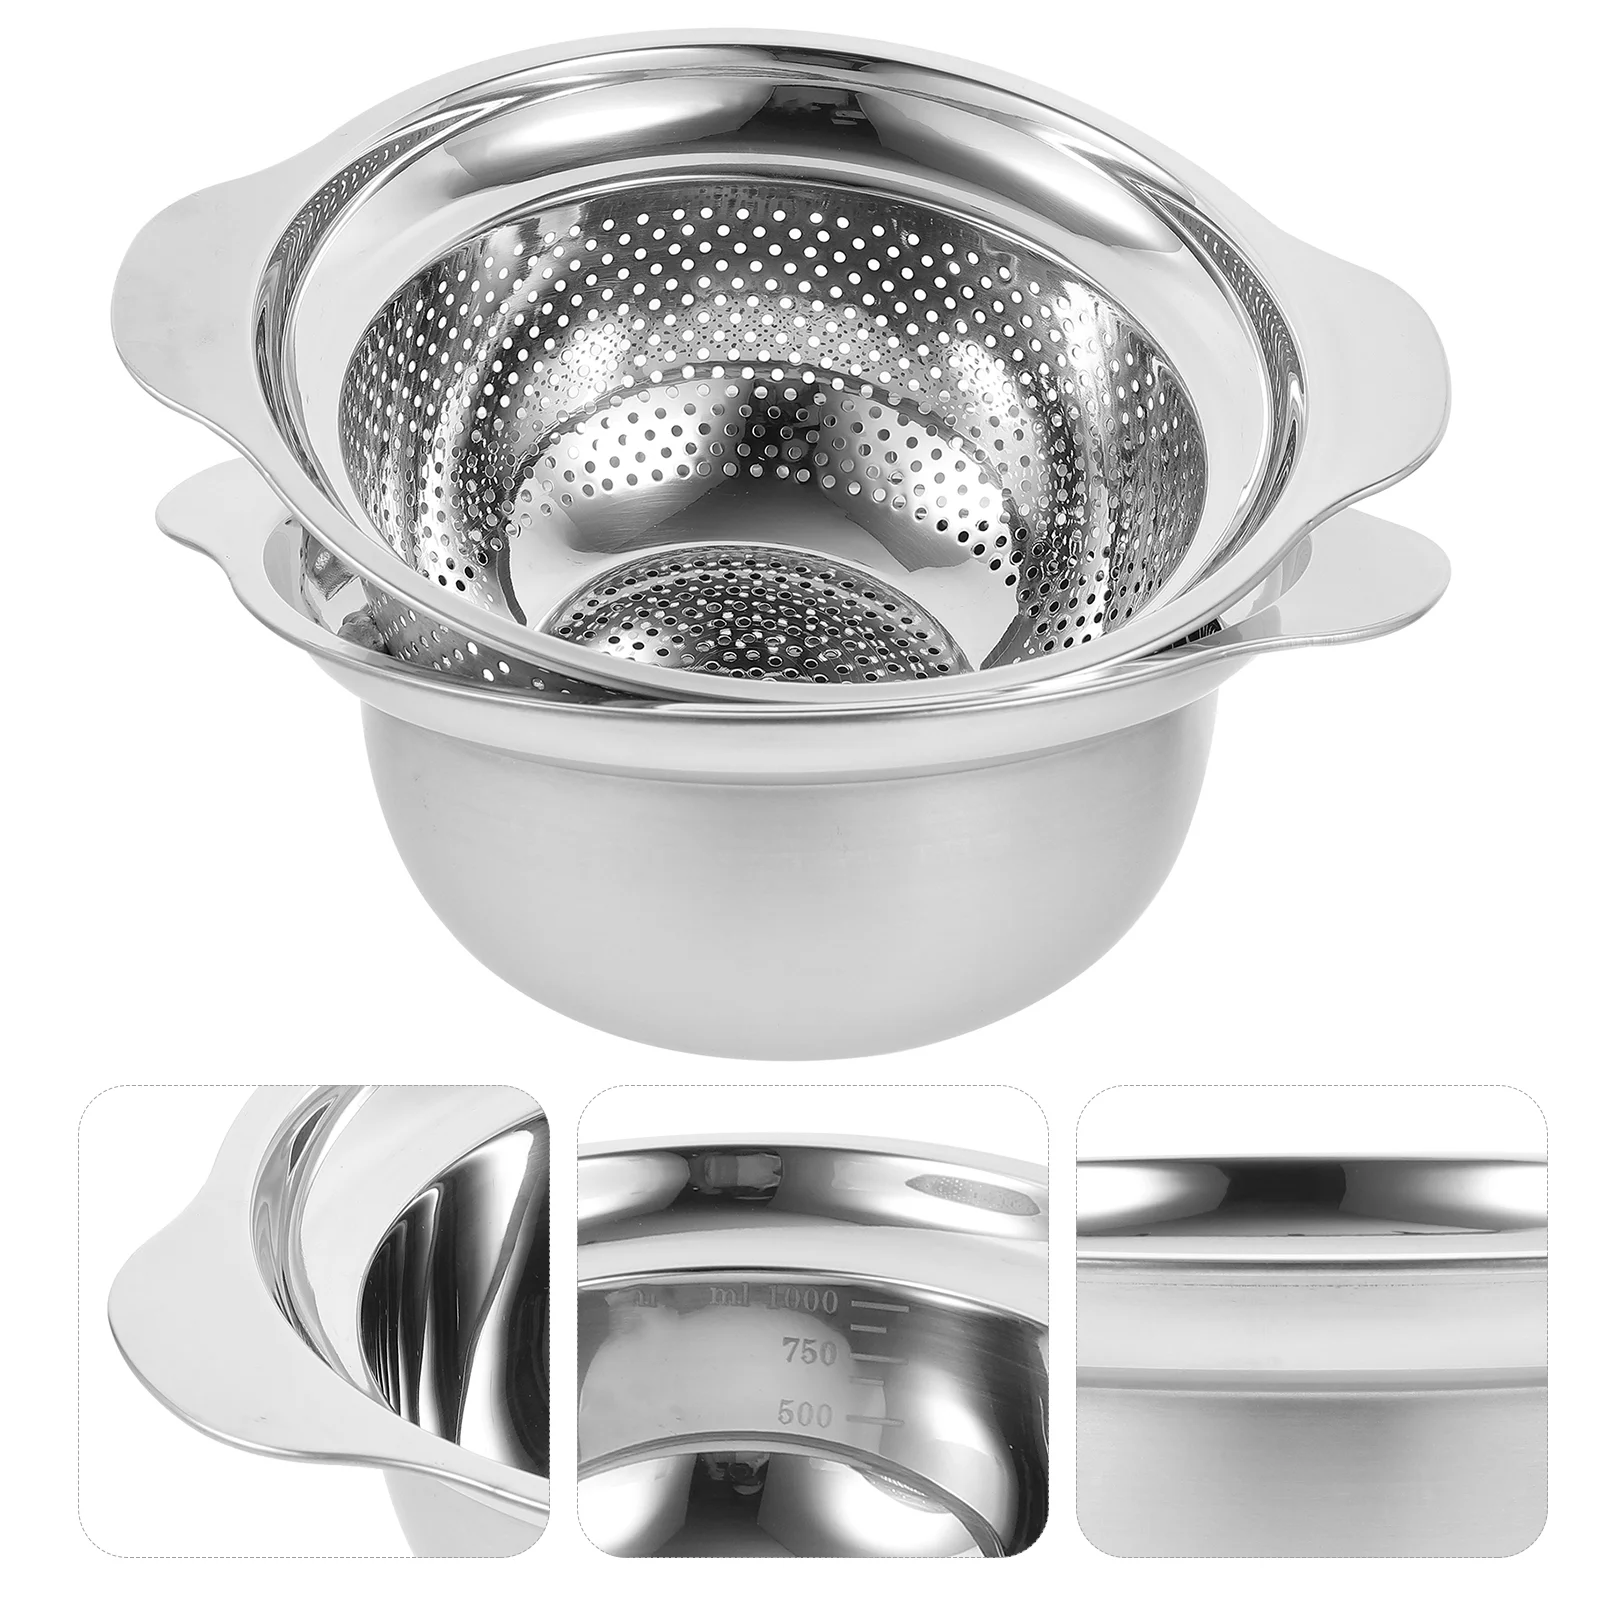 

Stainless Steel Drain Basin Colander Fruit Strainer Household Vegetable Kitchen Accessory Handle Mixing Gadget